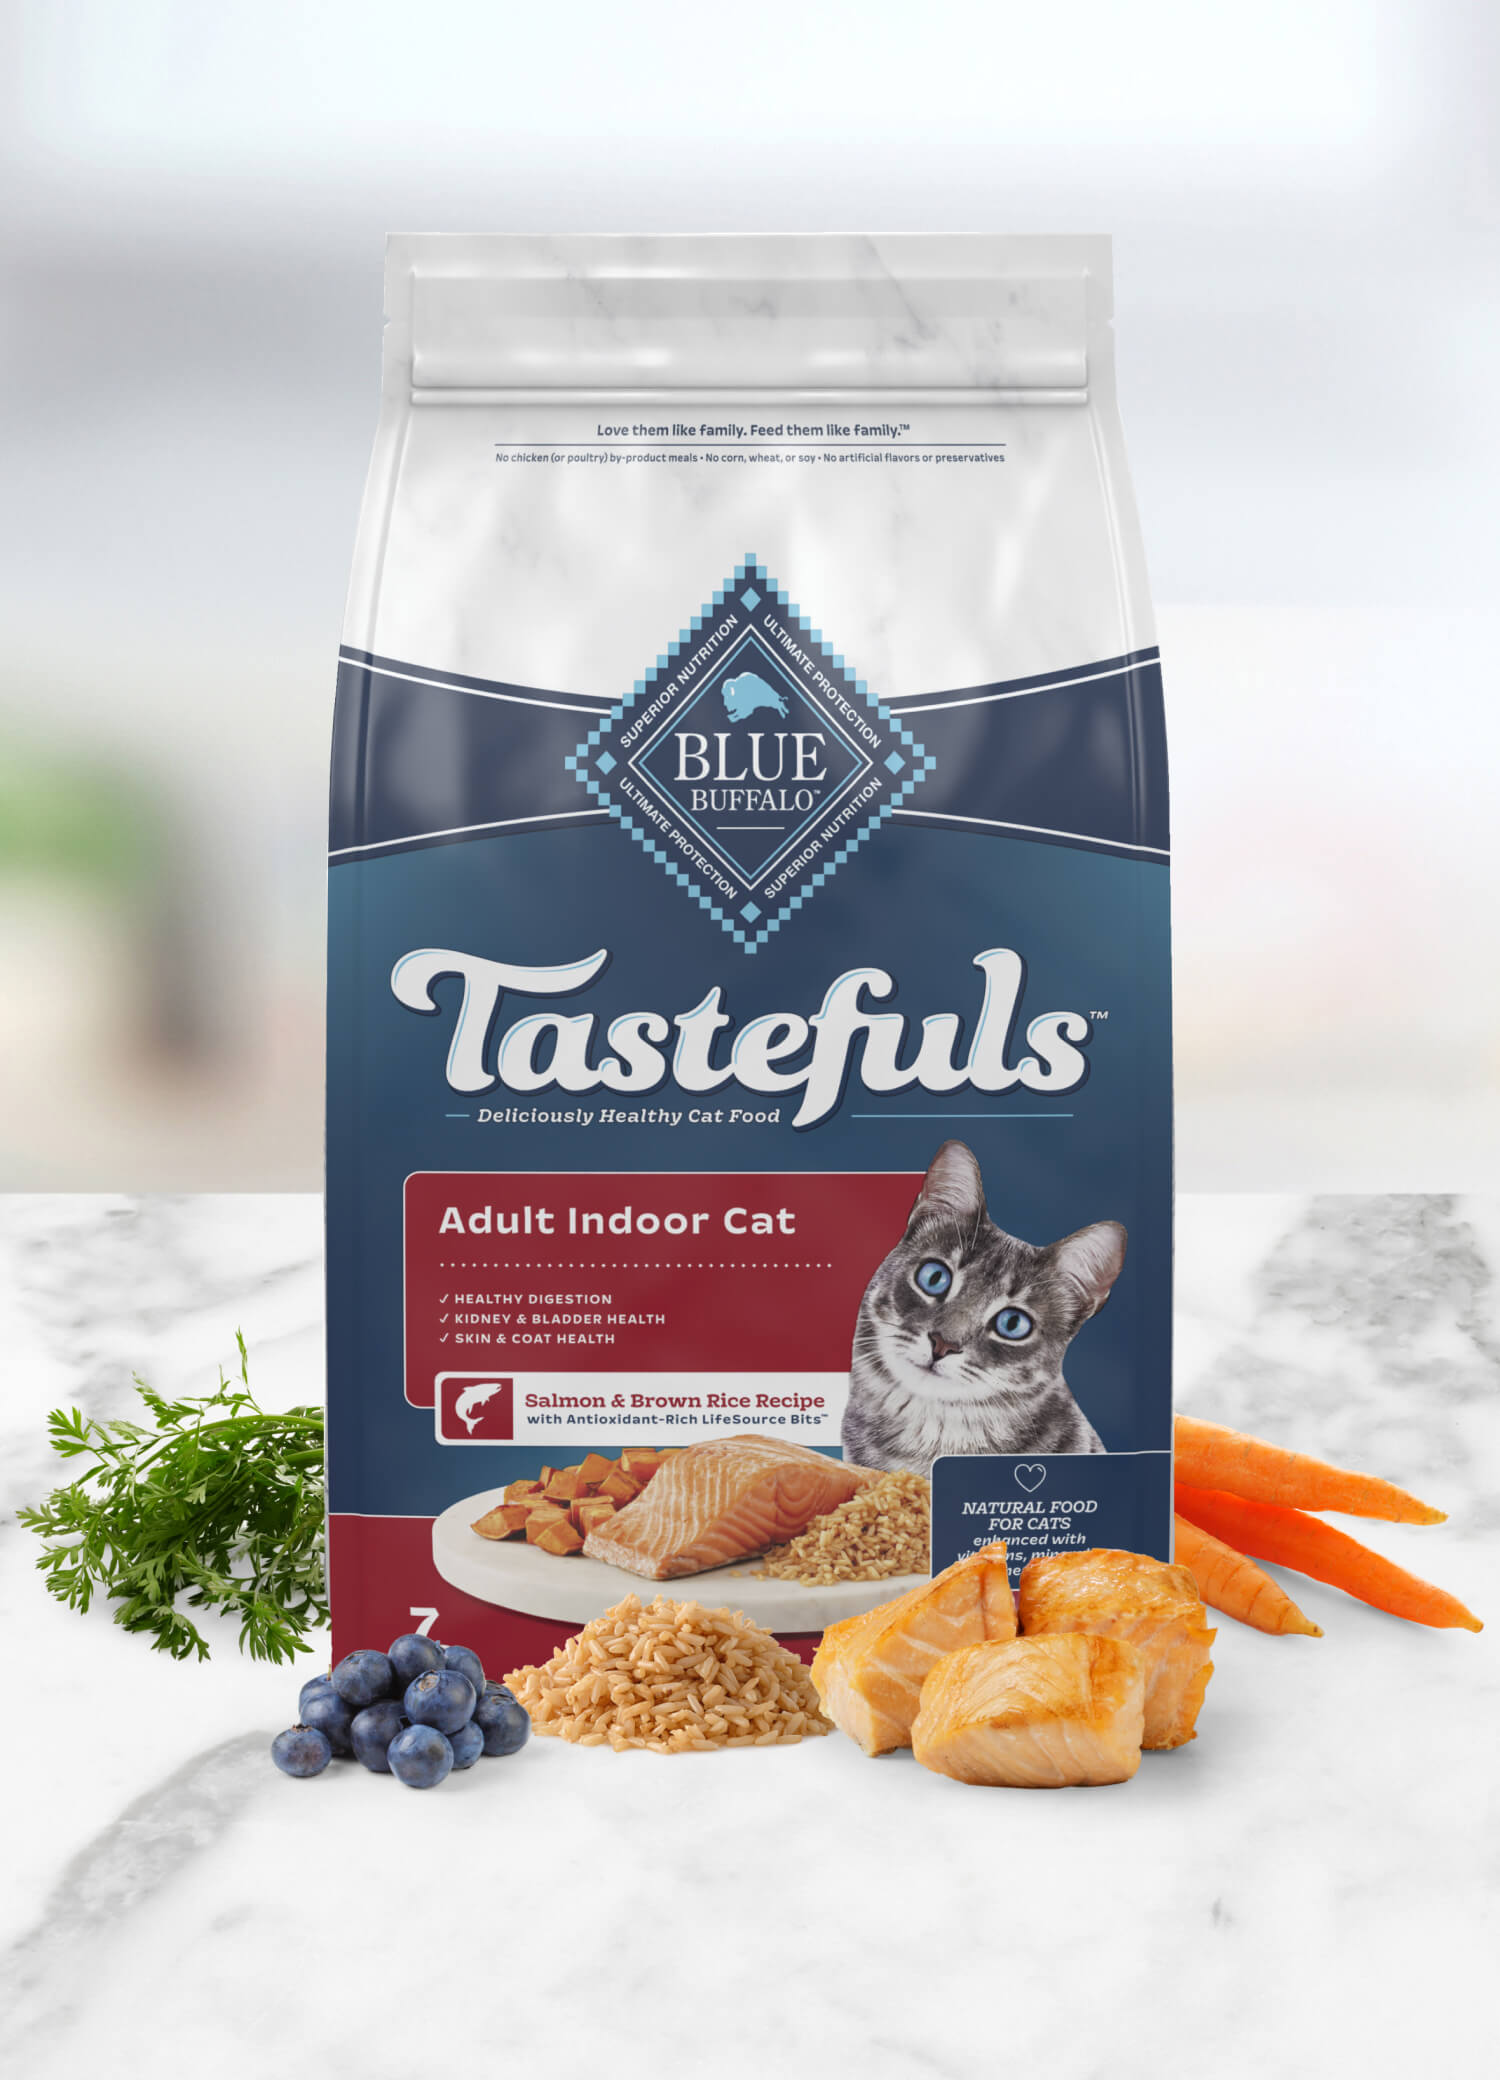 A bag of Blue Buffalo Tastefuls cat food for adult indoor cats, featuring salmon and brown rice recipe, shown with fresh ingredients like greens, carrots, and fish.